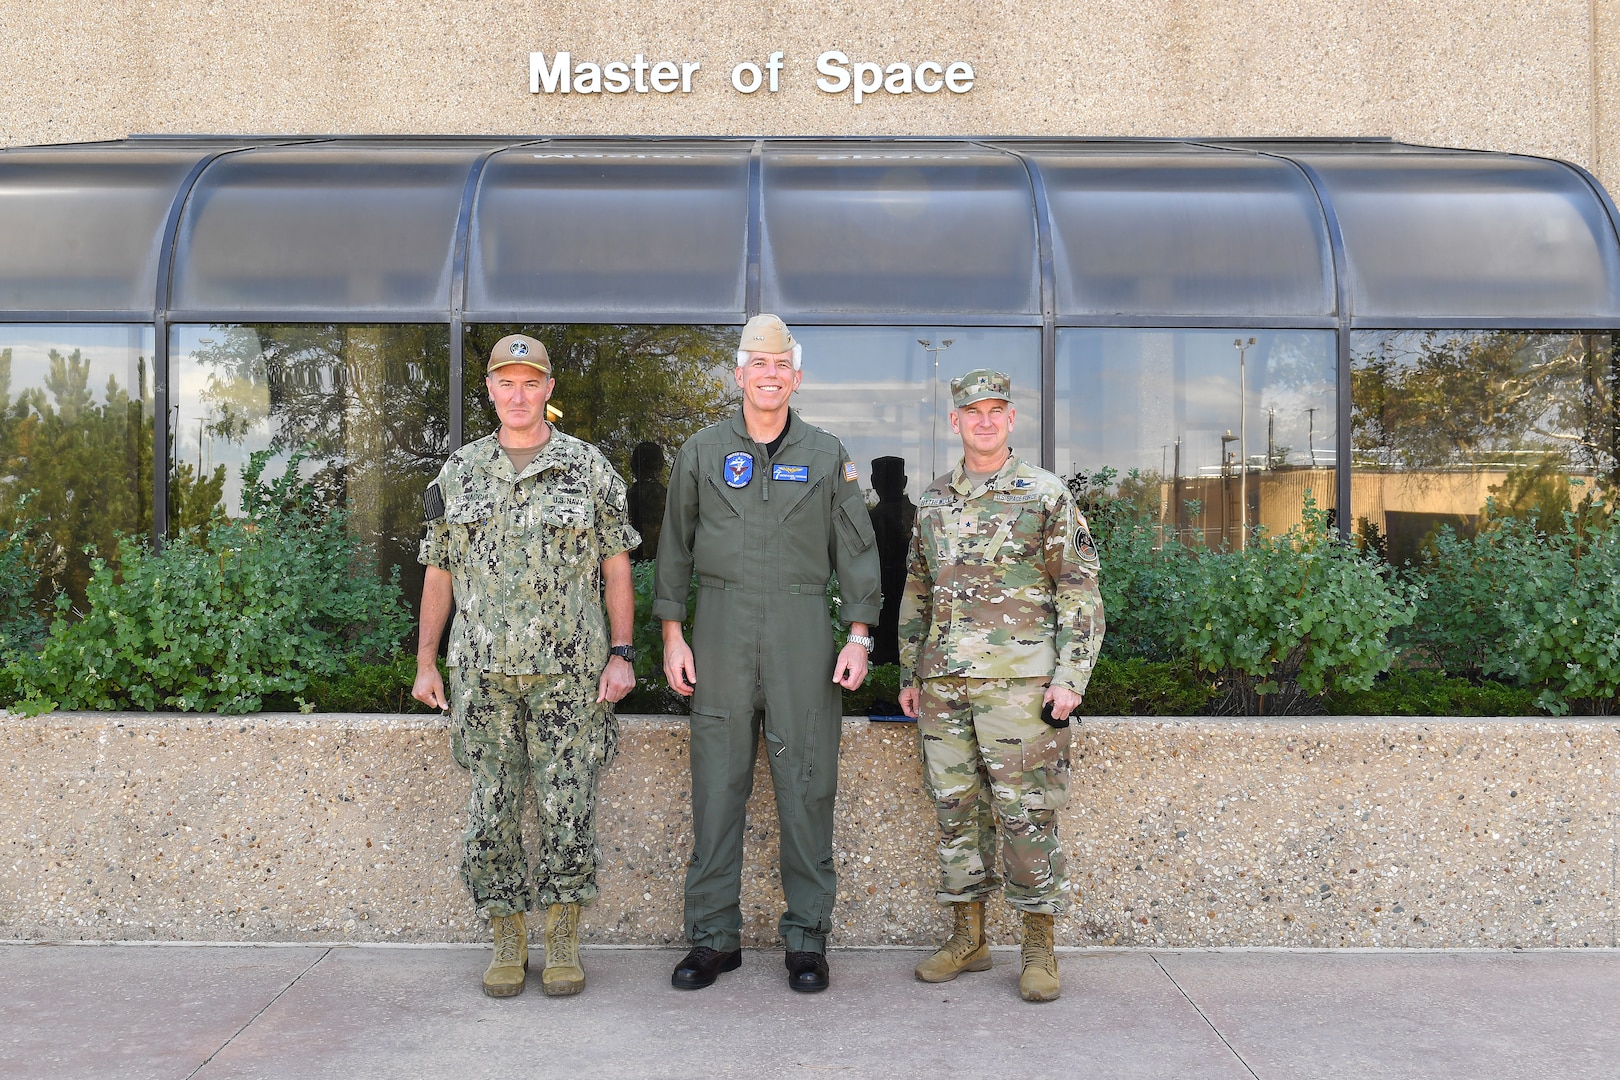 Military leaders pose for a photo during a visit to Schriever Space Force Base, Colorado.